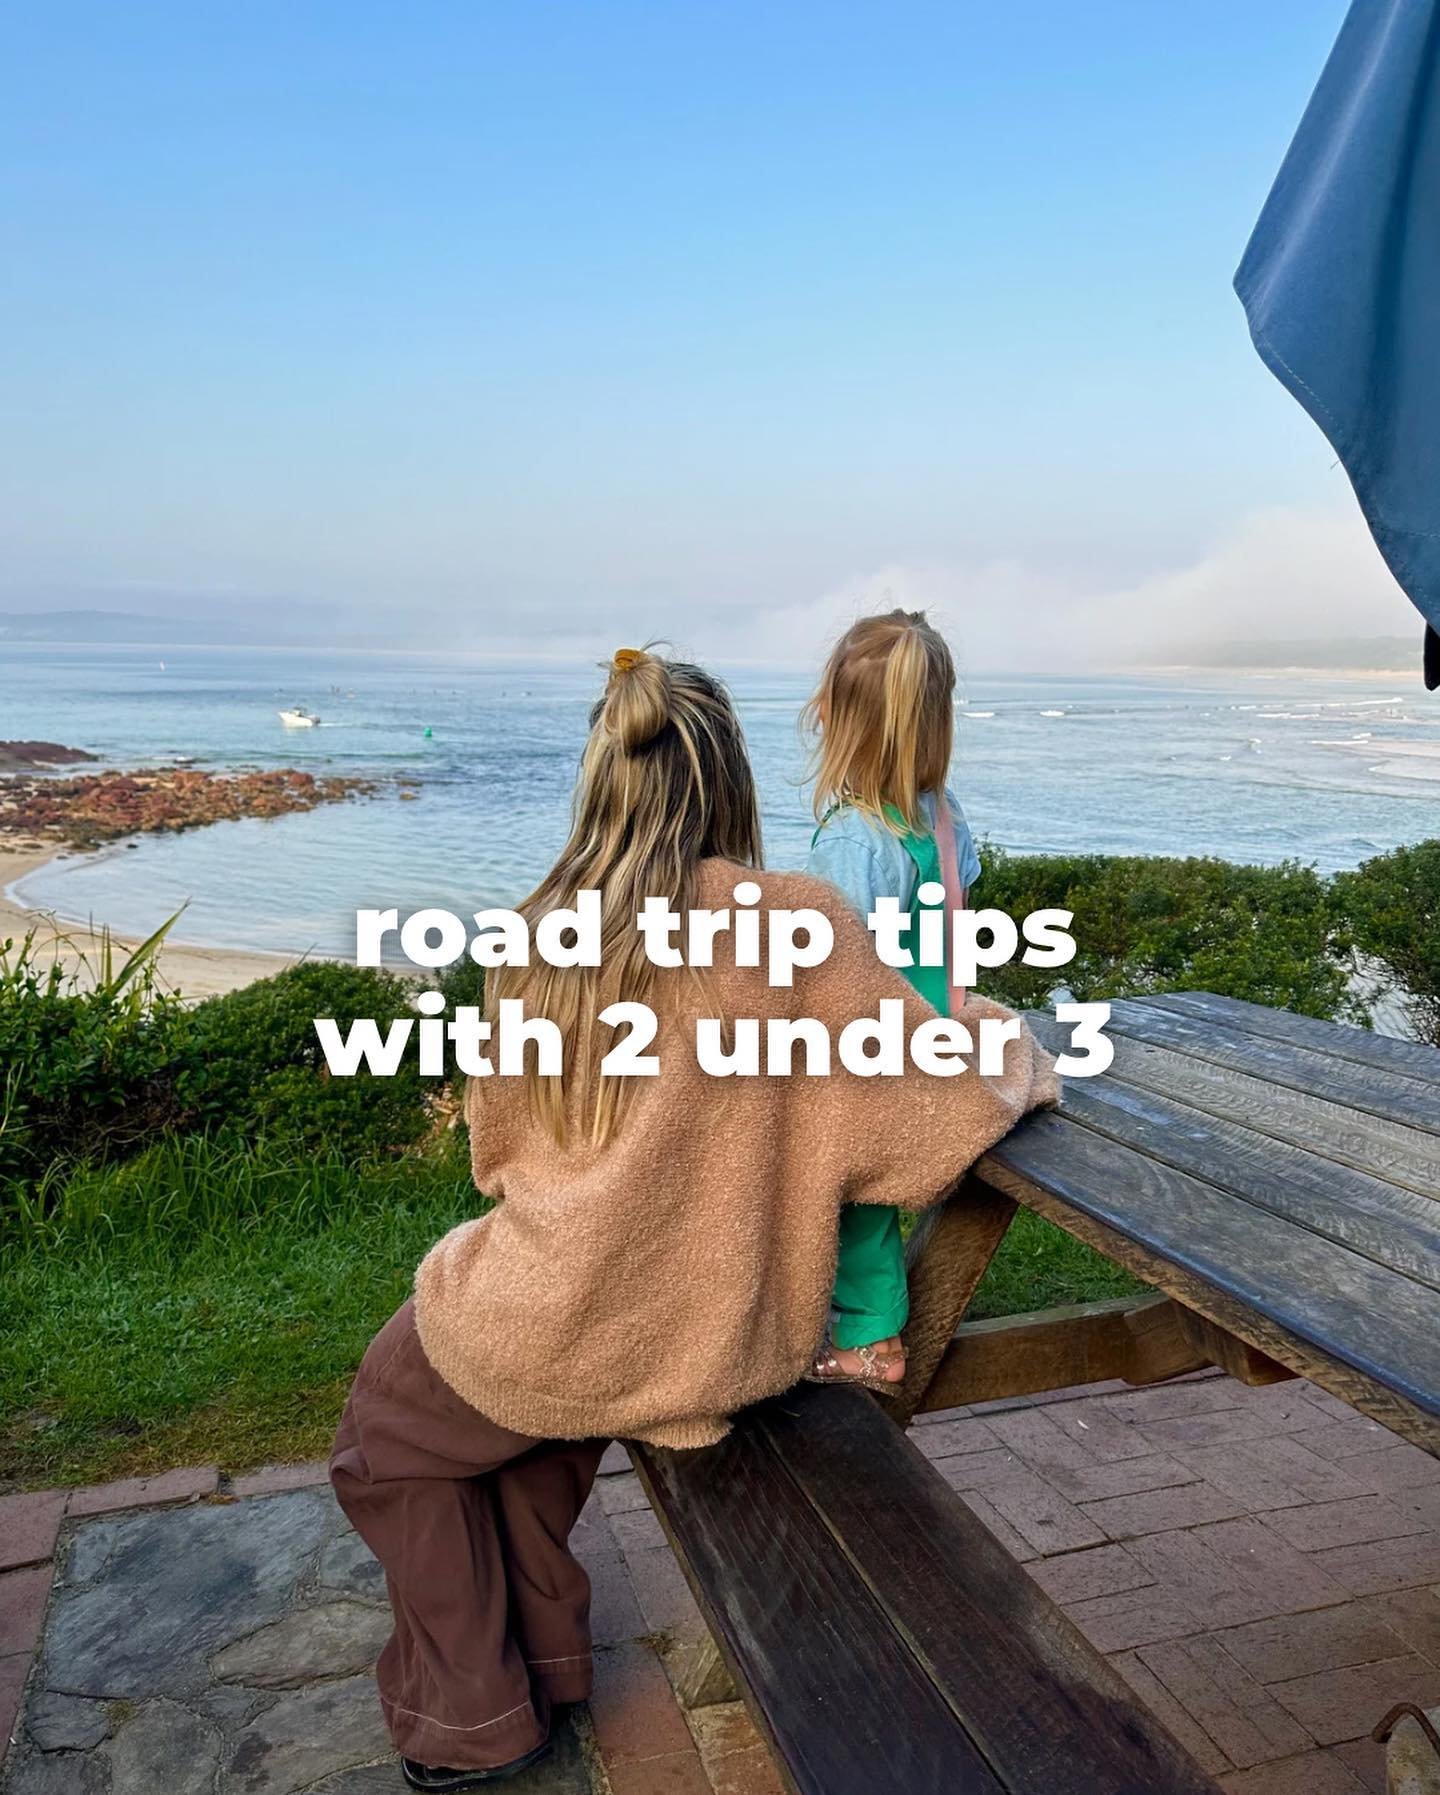 I shared this recently in one of our emails... yesterday I bumped into another parent at daycare who said they'd read it &amp; enjoyed it ... so I thought I'd share it here too!

If you have any road trip tips for travelling with kids, drop them in t